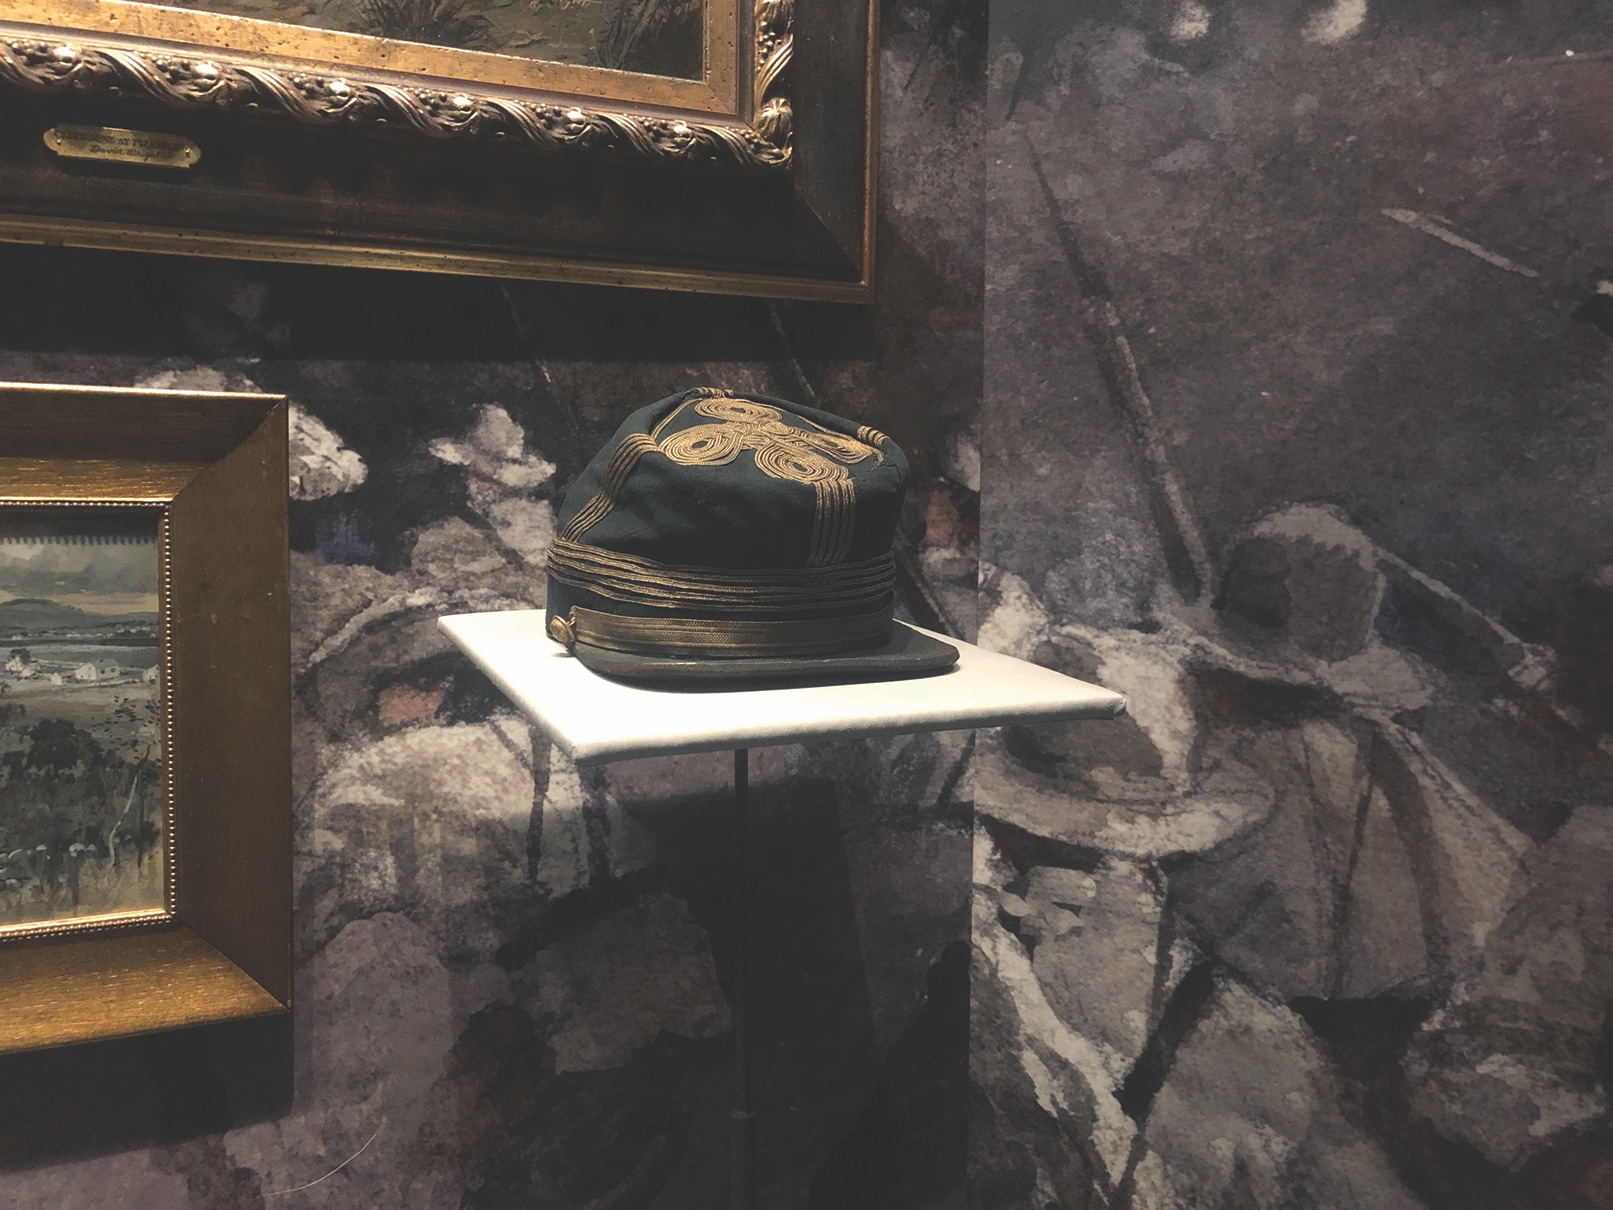 The general’s embroidered kepi, left, is on display at Nashville’s Tennessee State Museum. (John Banks)